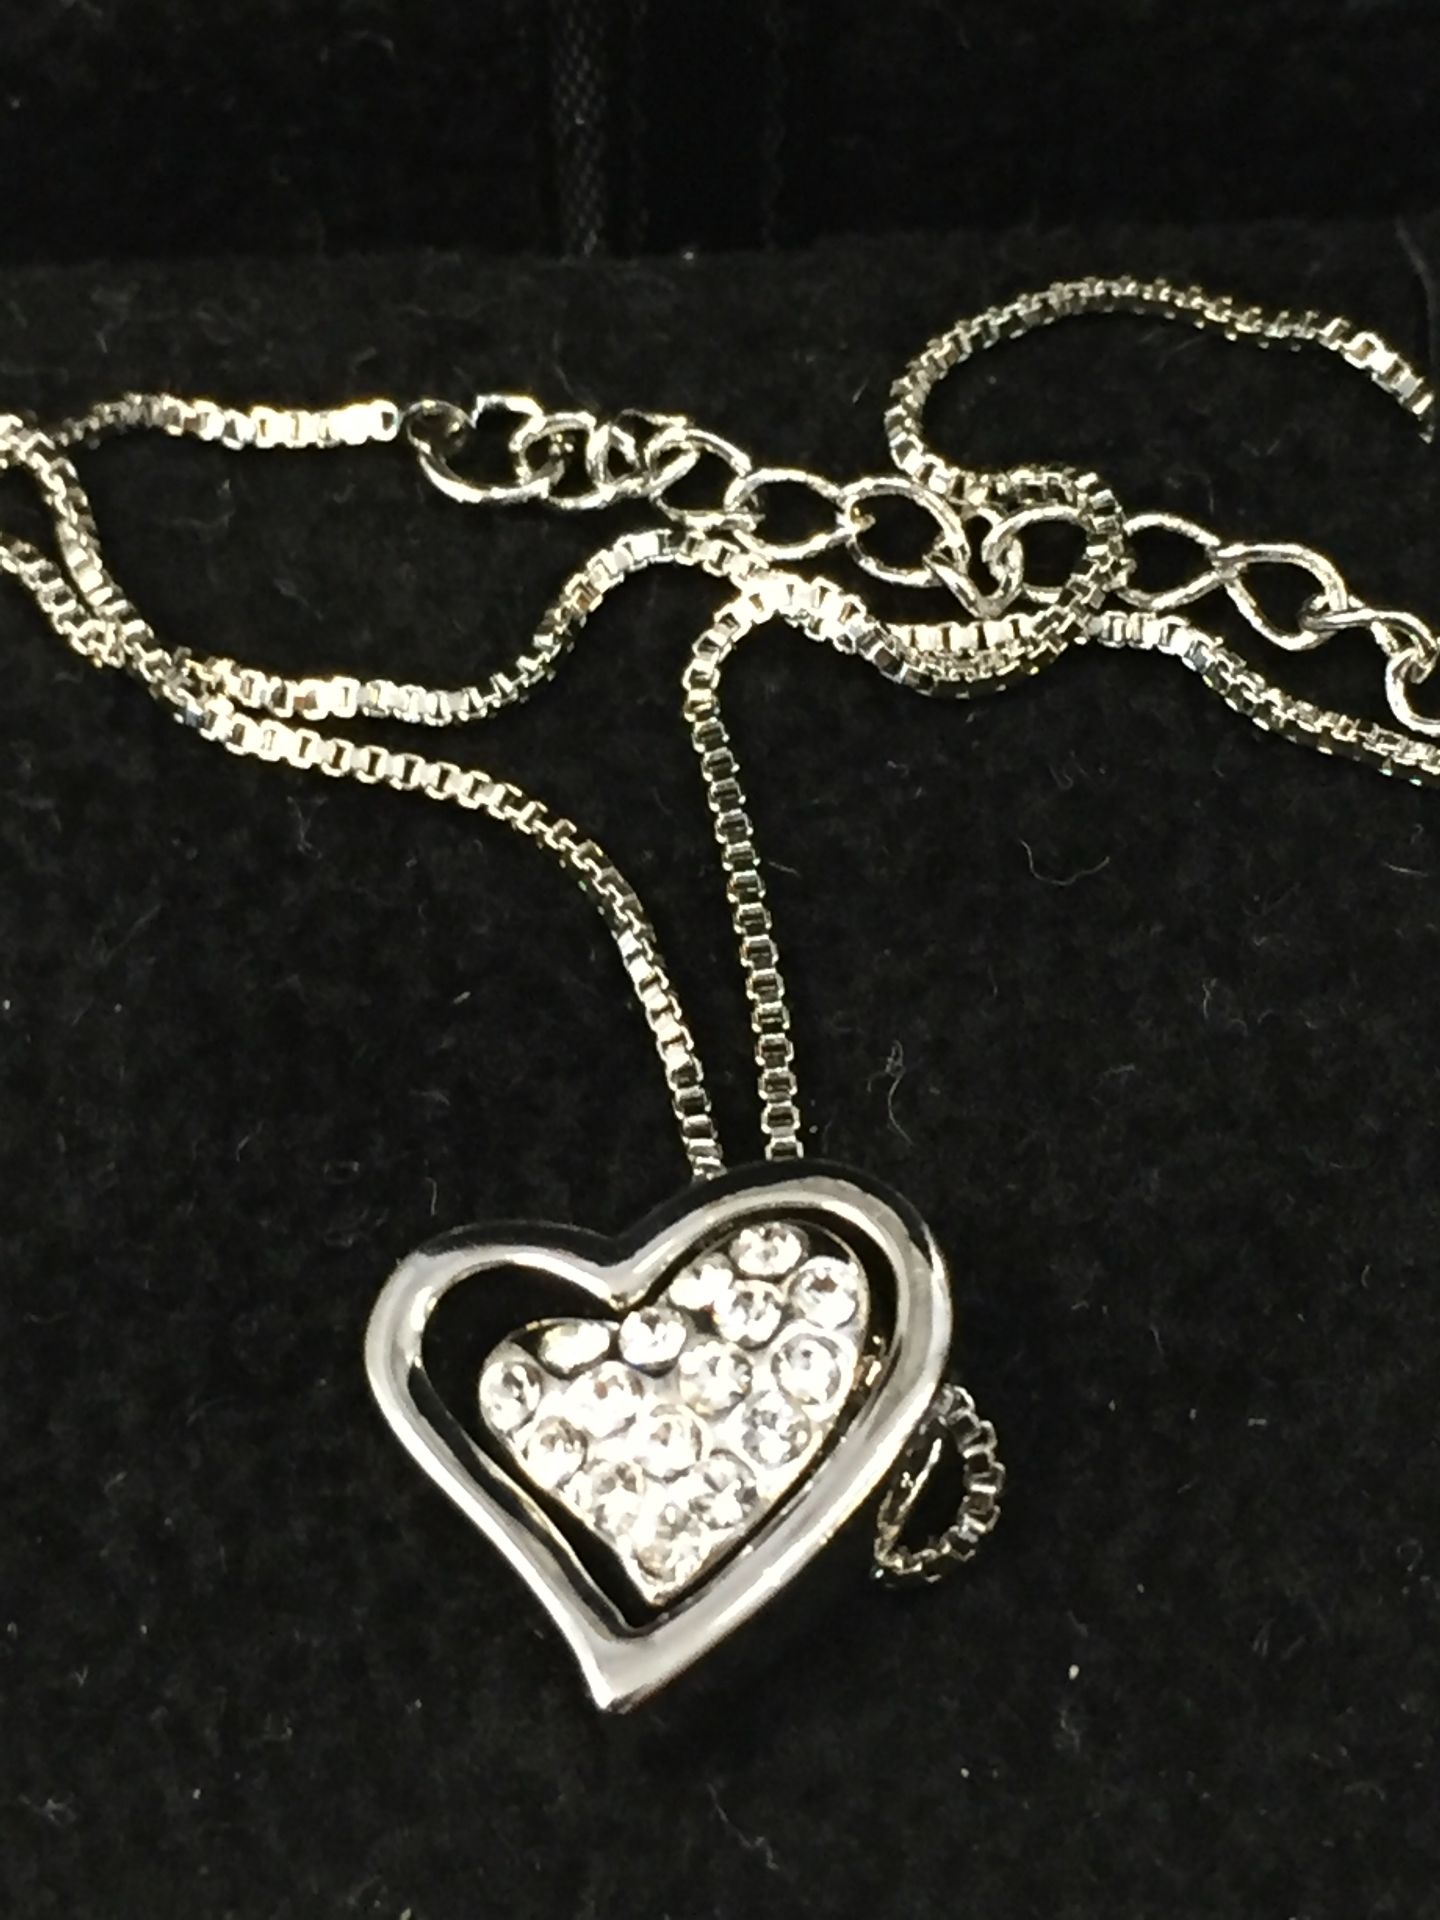 WM Chain With White Stone Cluster Heart Shape Pendant - Image 2 of 2